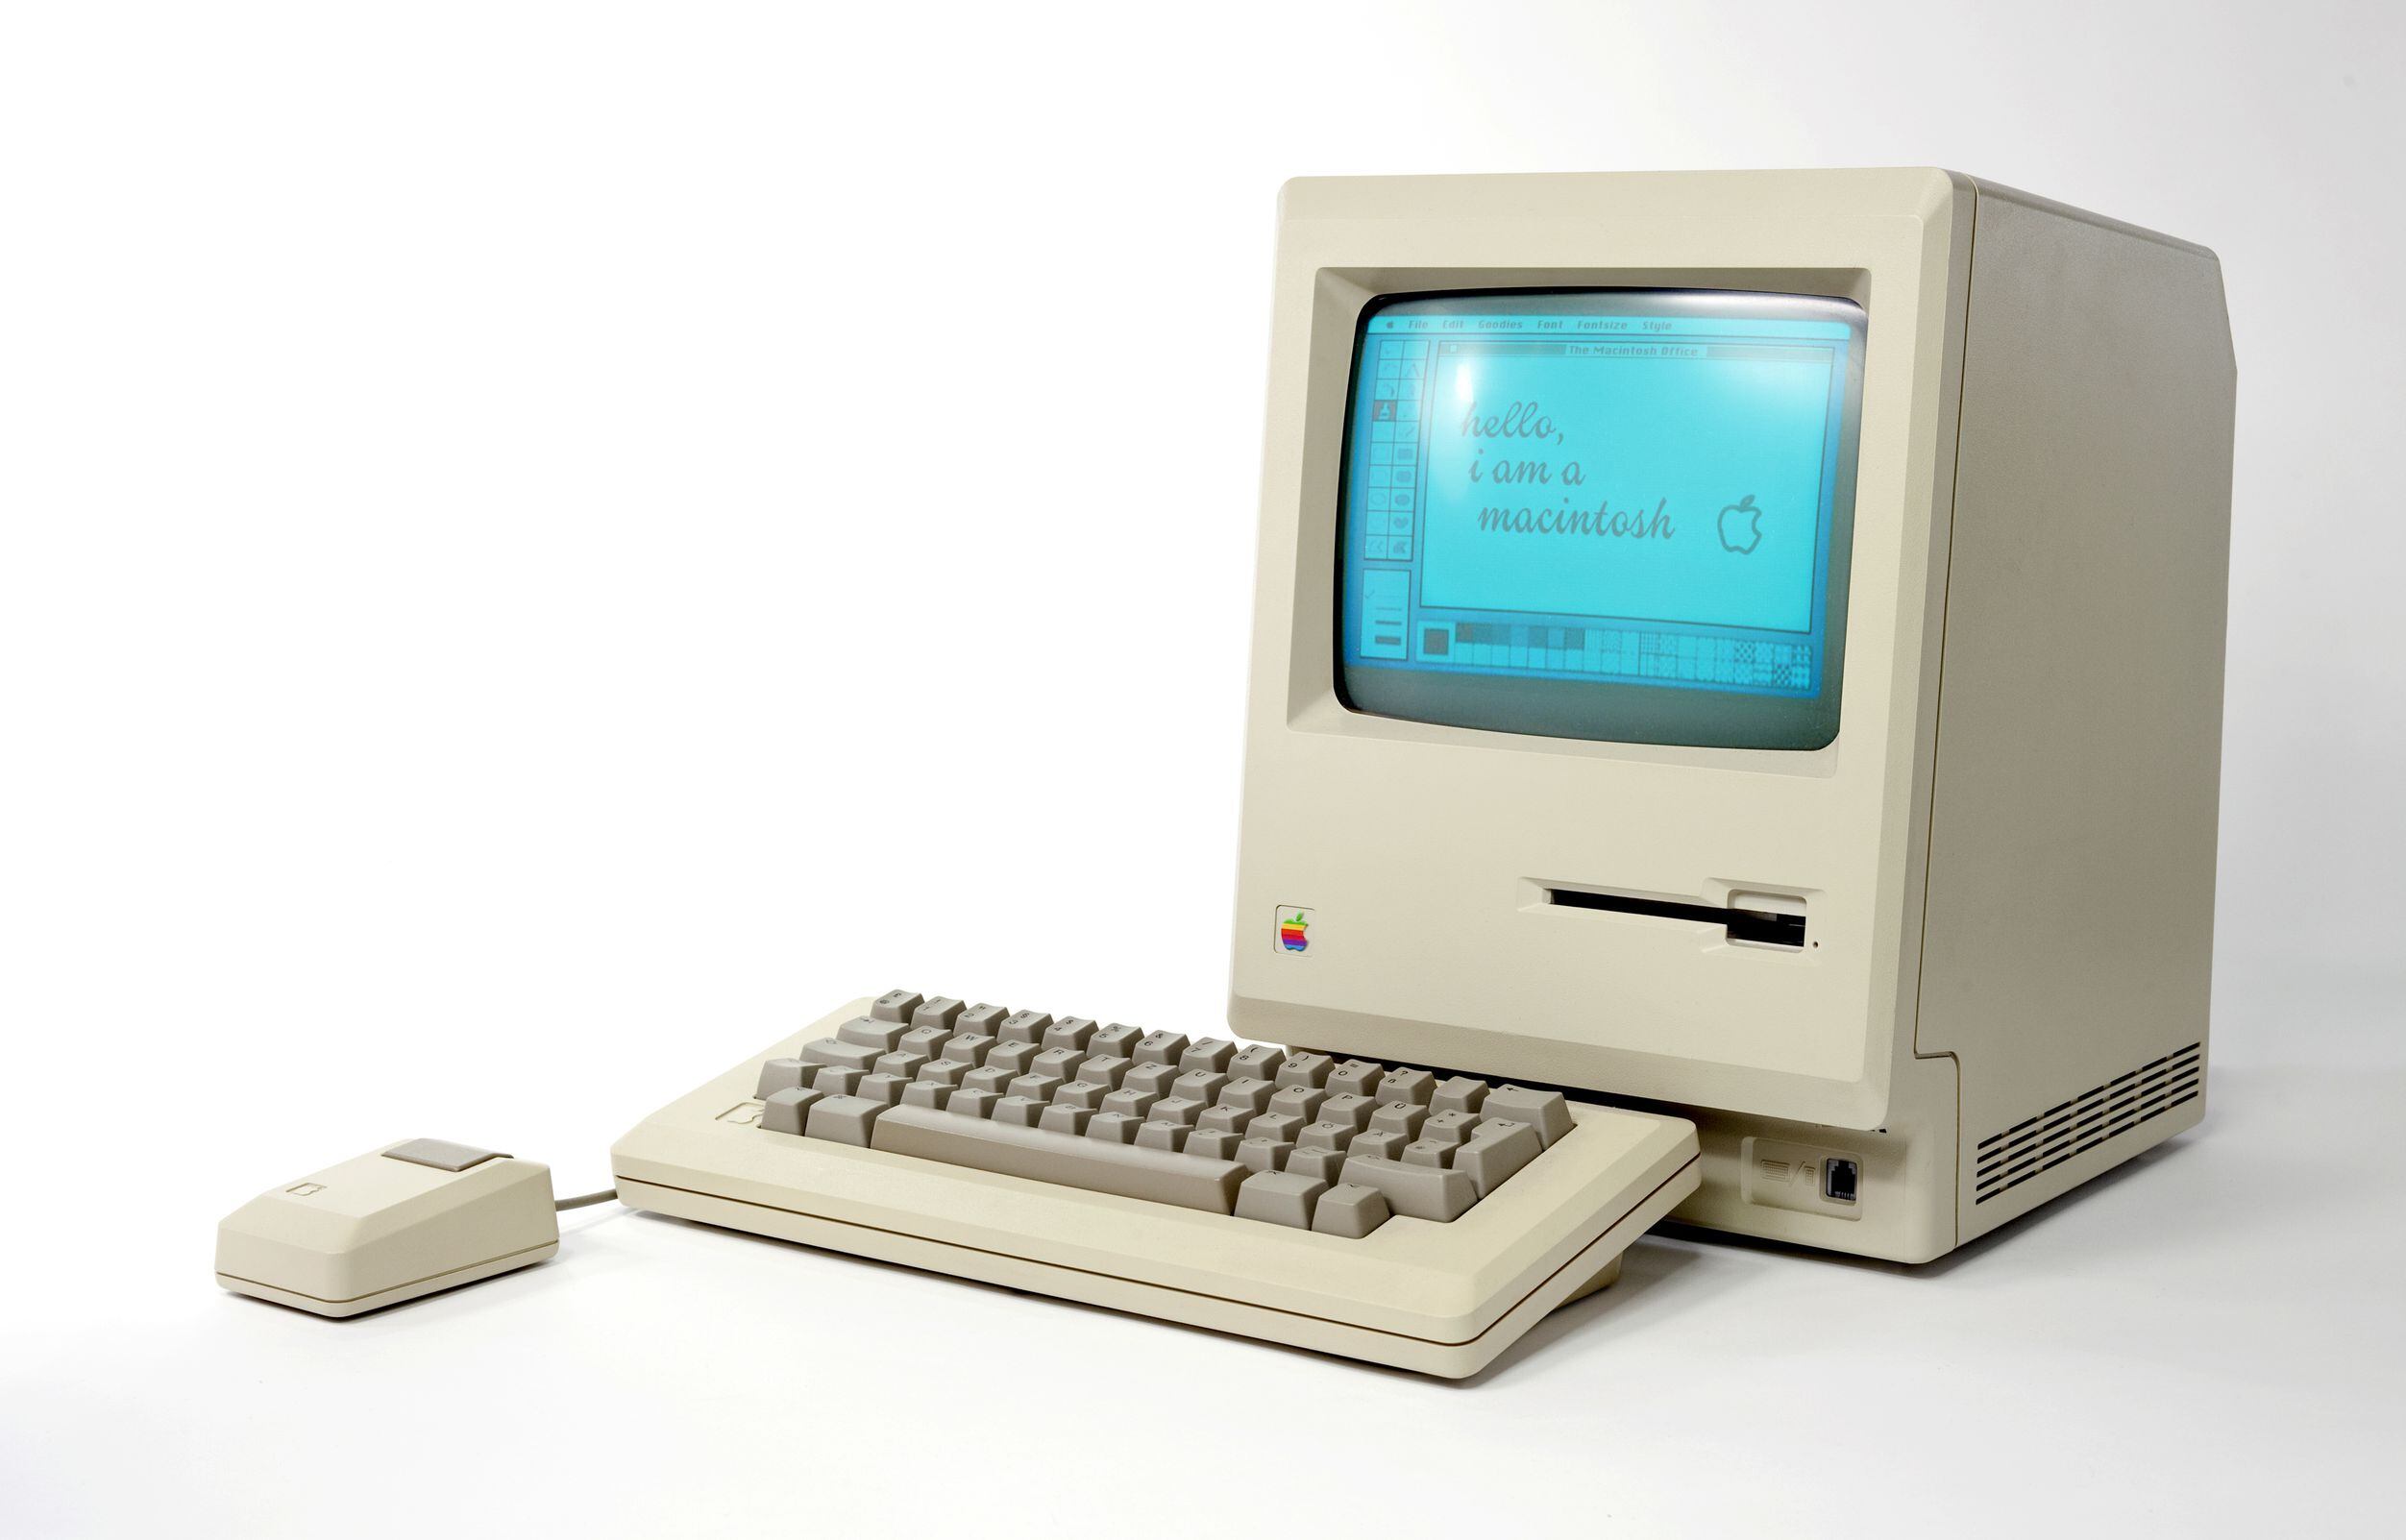 Flashback: Apple Computer's Macintosh took on IBM armed with a